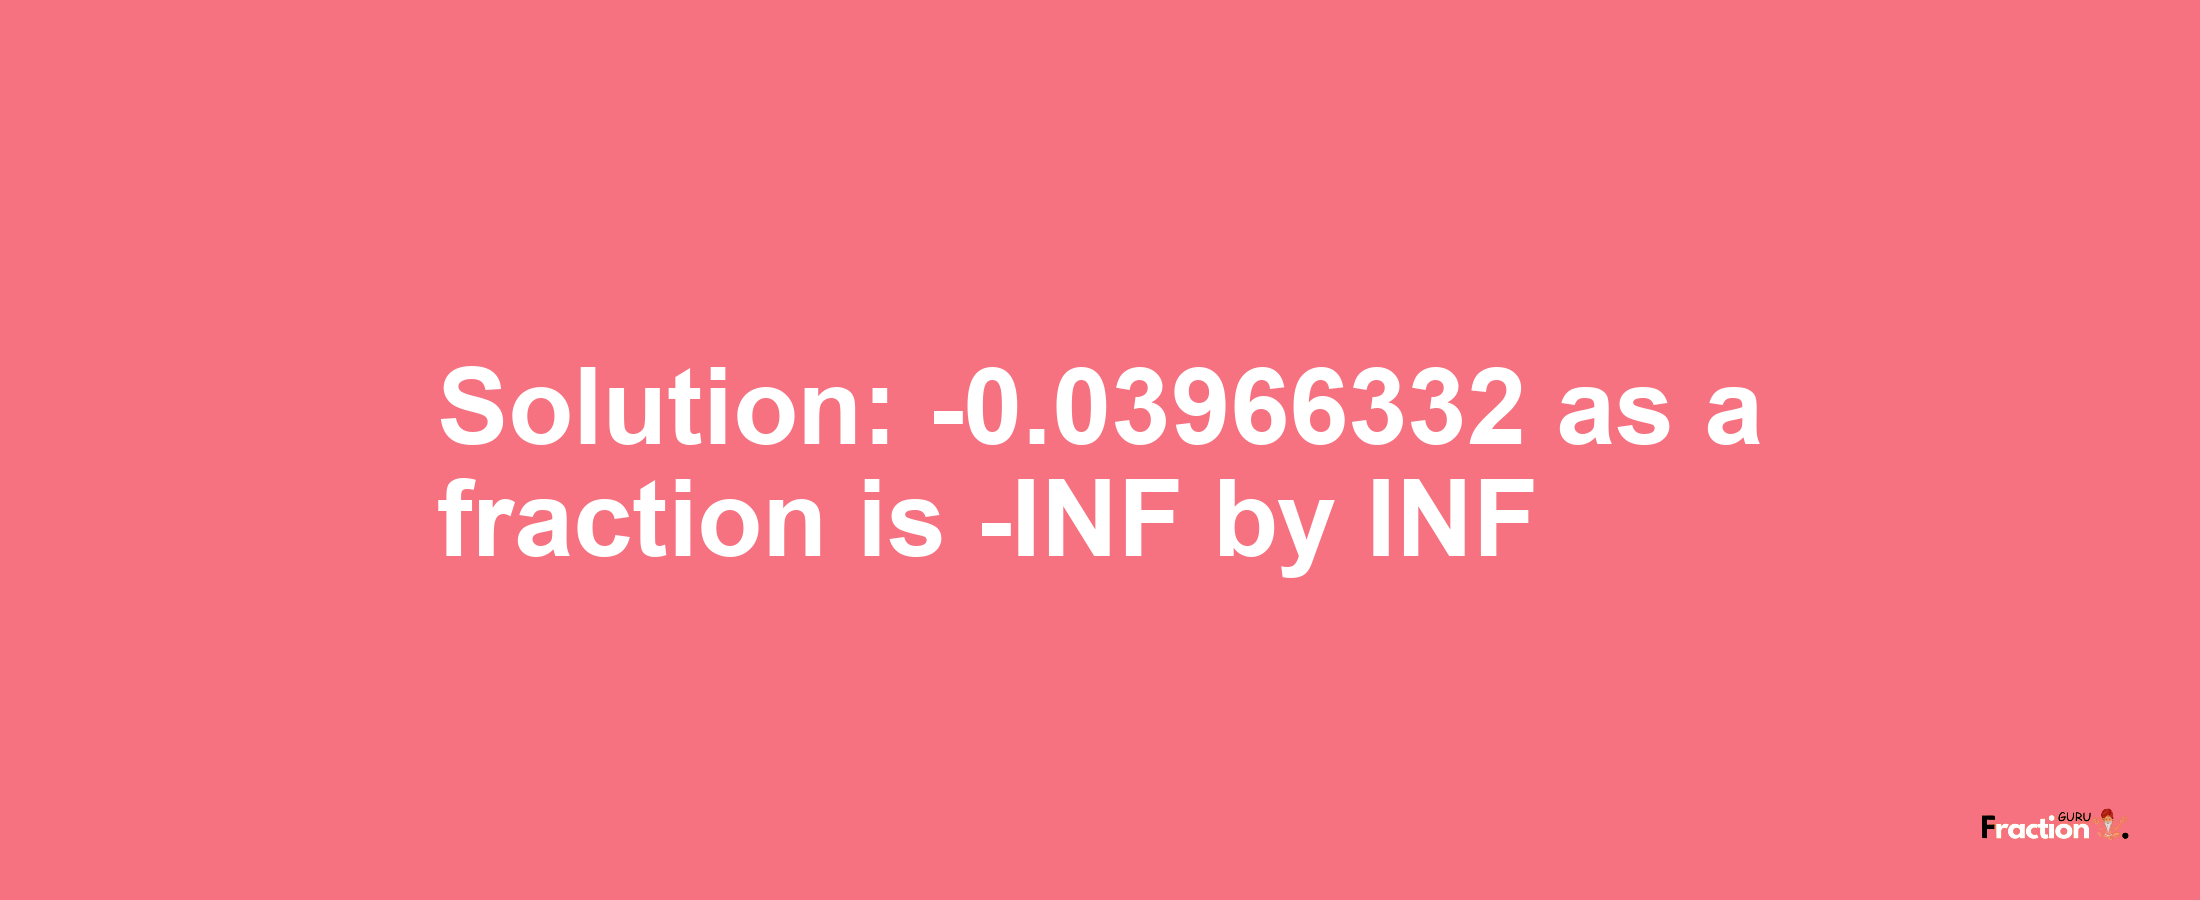 Solution:-0.03966332 as a fraction is -INF/INF